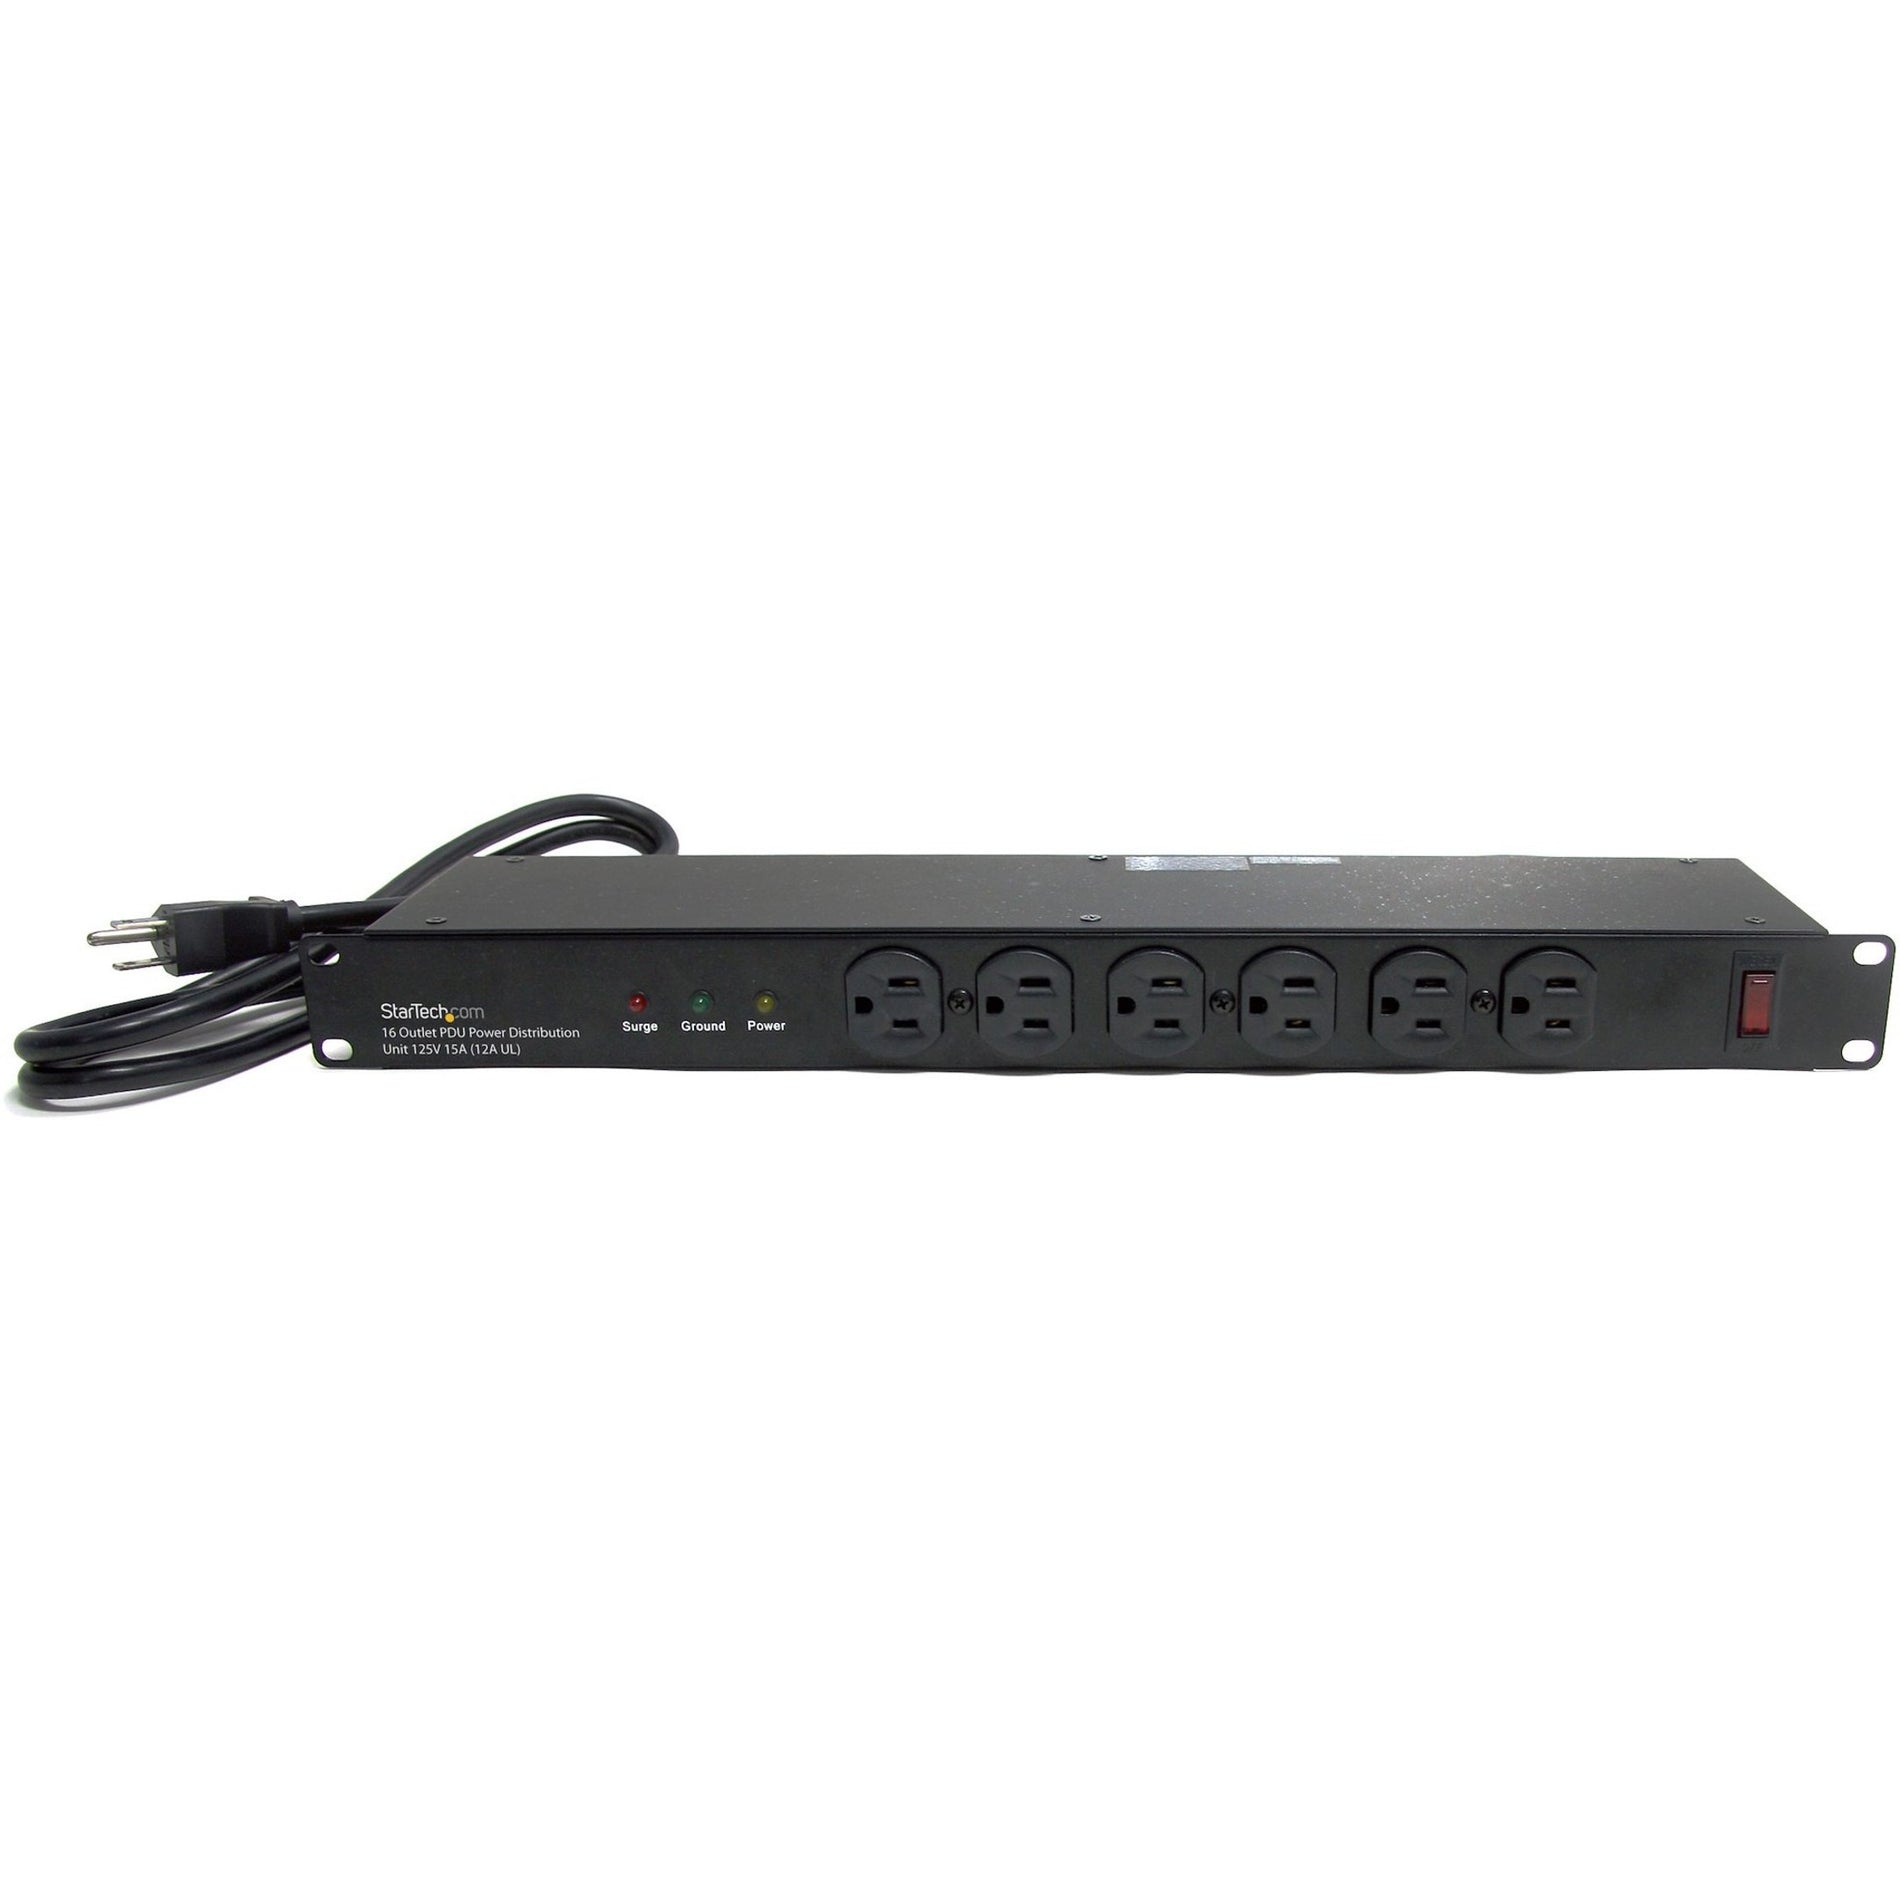 StarTech.com RKPW161915 Rackmount PDU with 16 Outlets and SurgeProtection - 1U, 15A, 120V AC